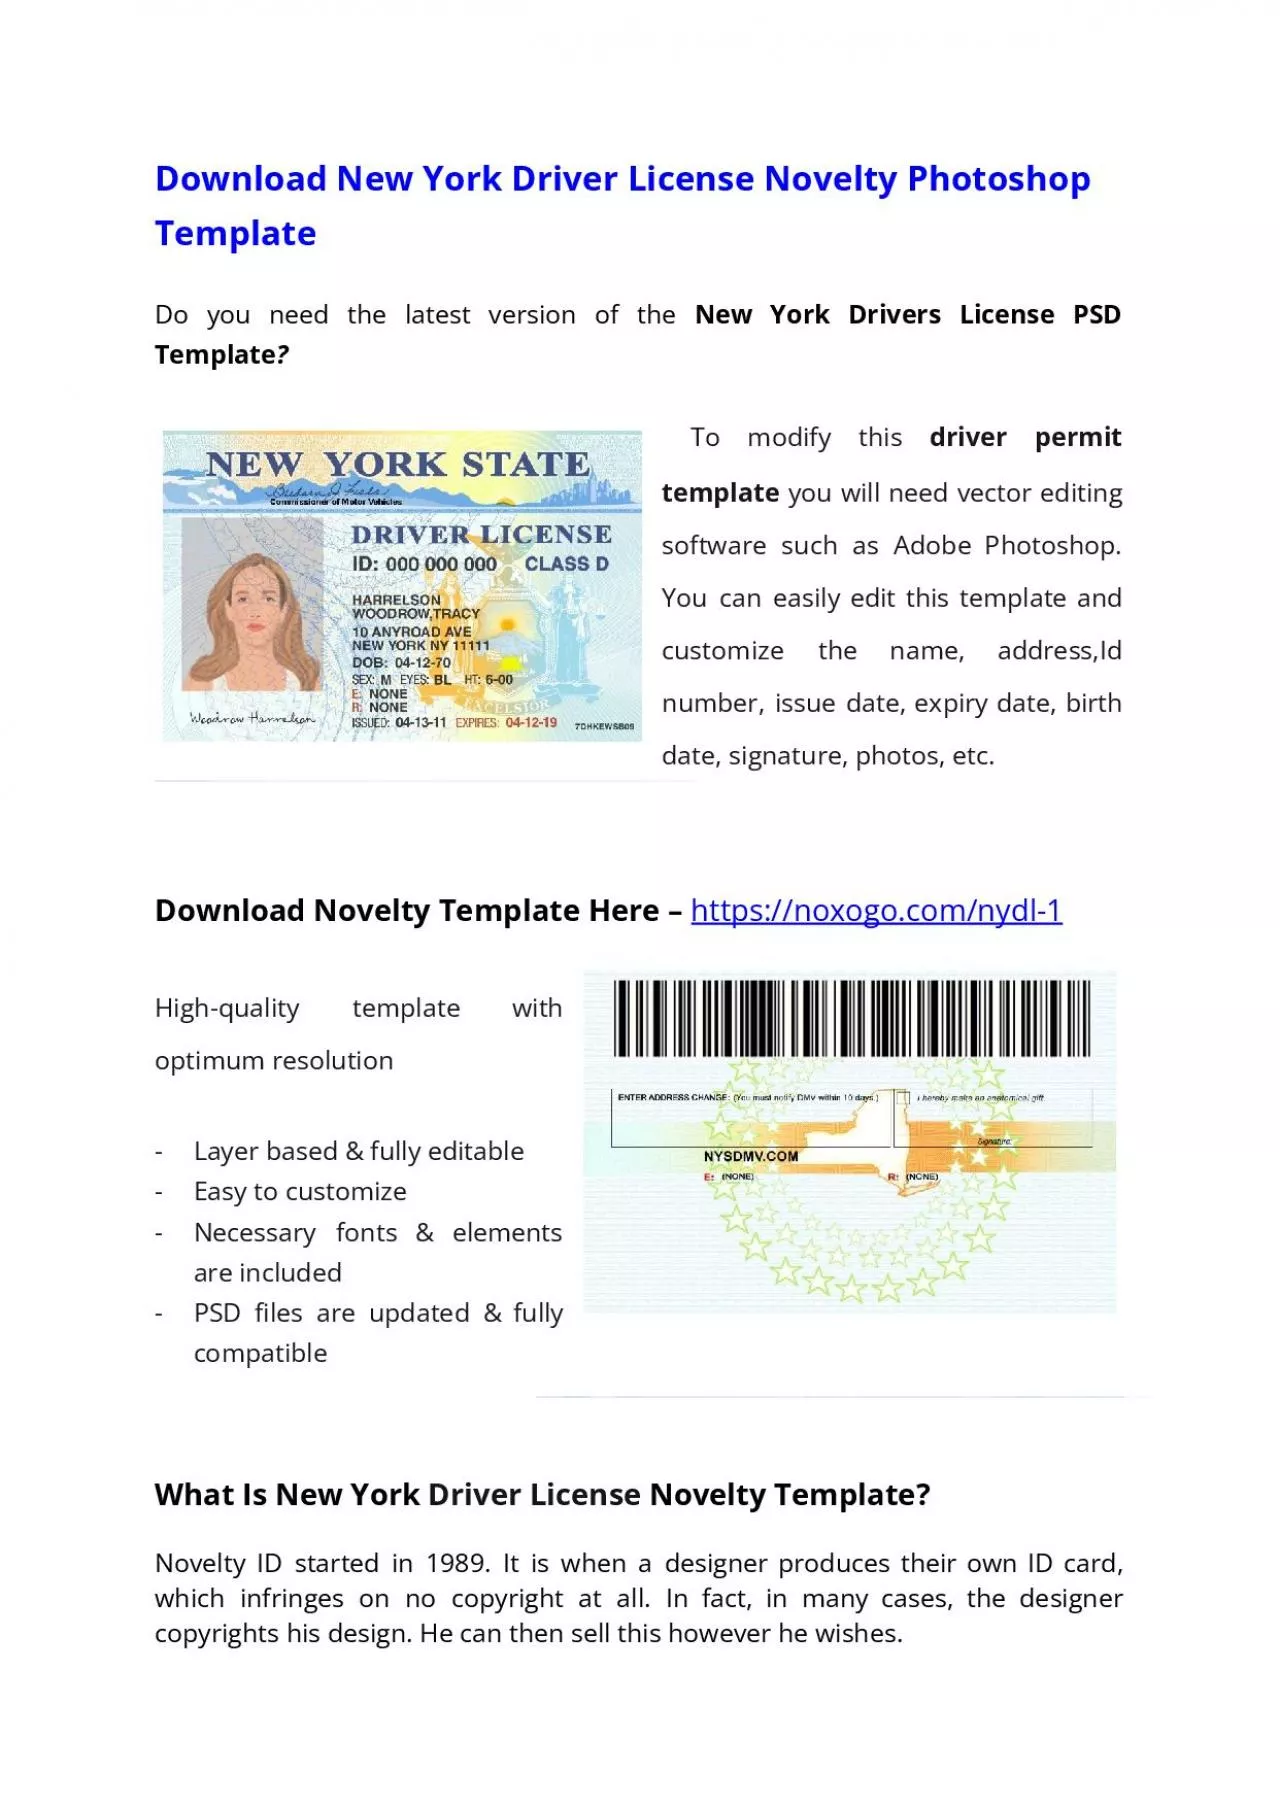 Nevada Drivers License PSD Template – Download Photoshop File